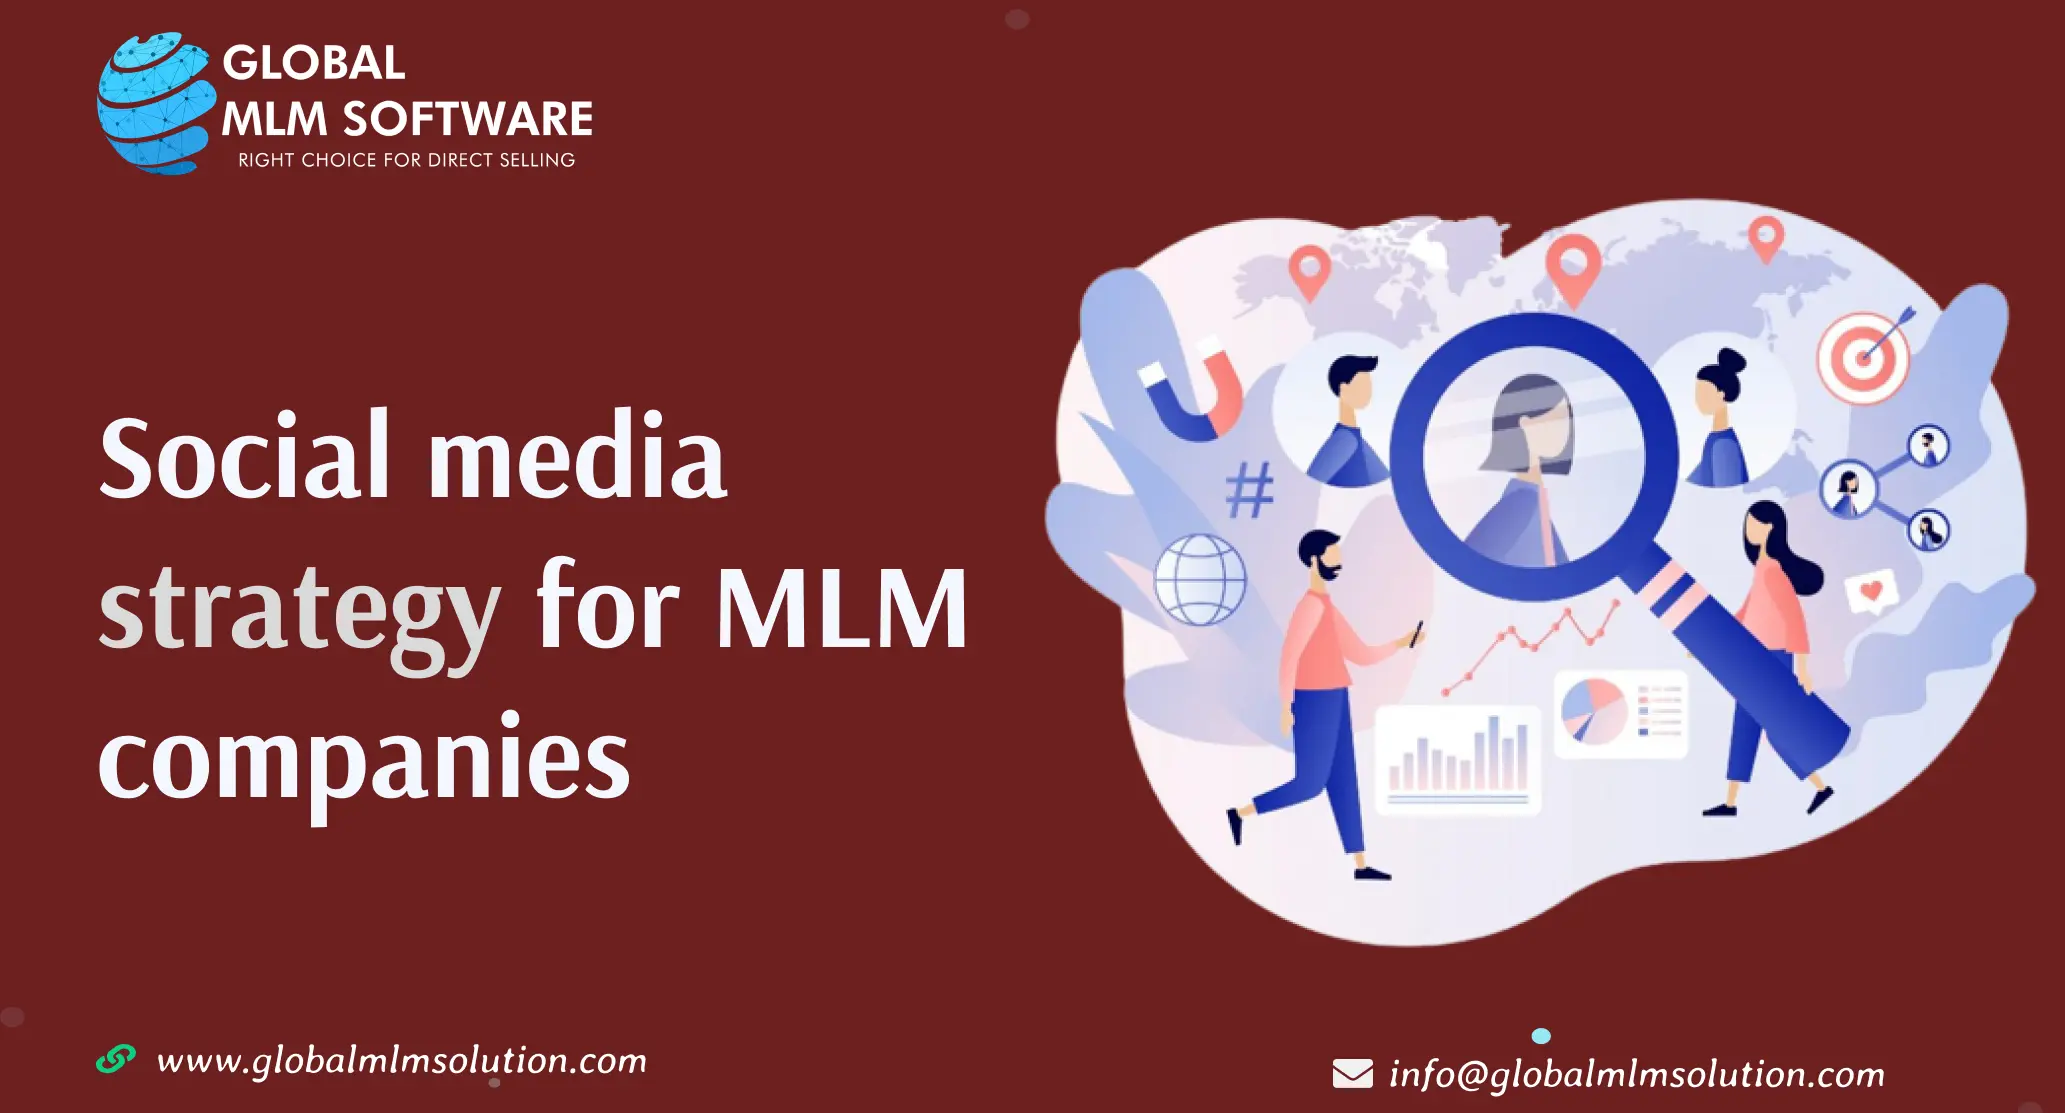 Social media strategy for MLM companies